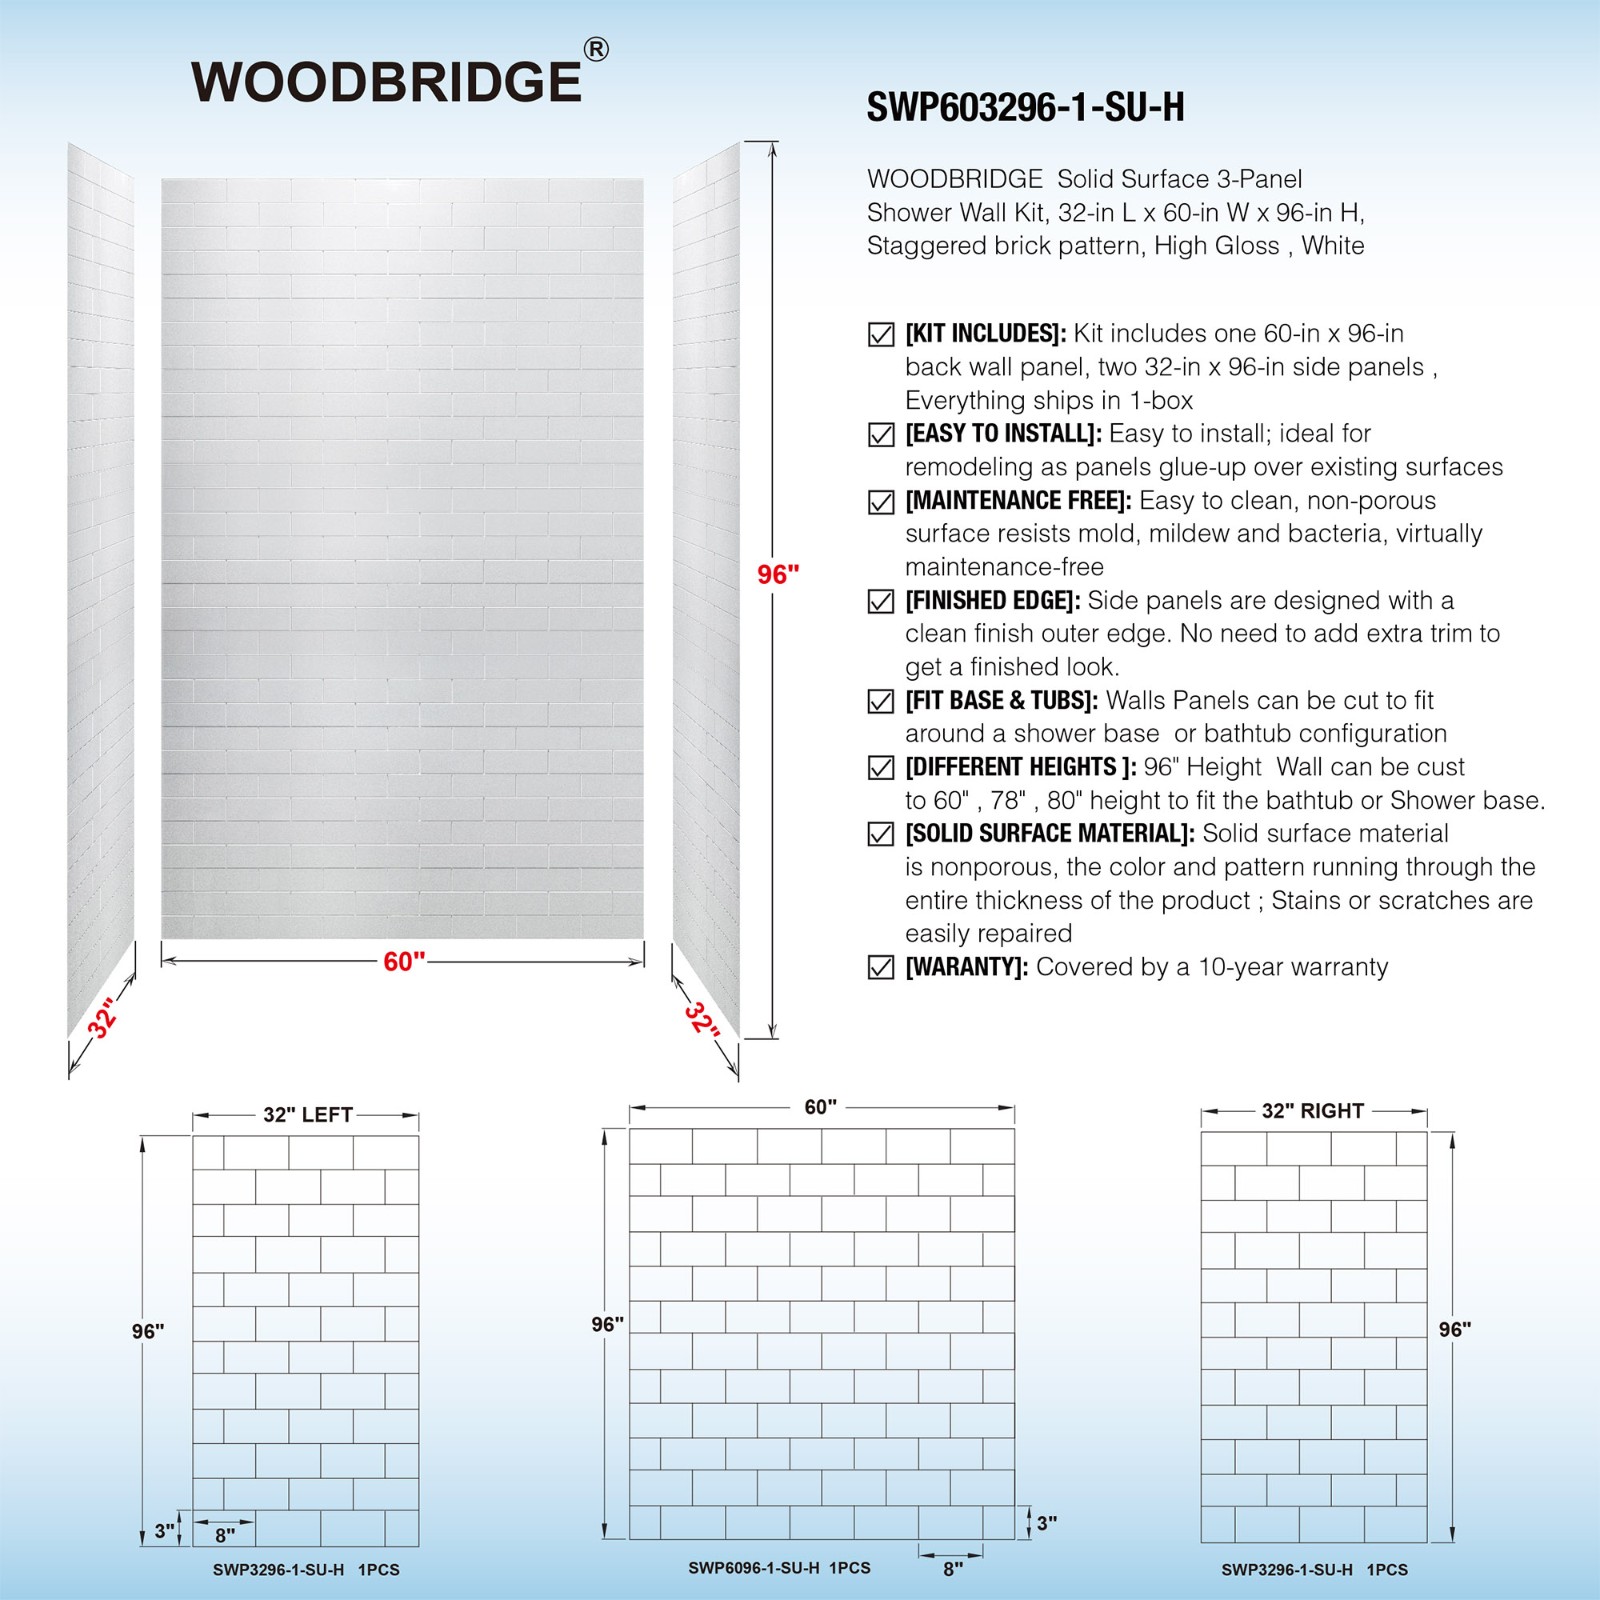  WOODBRIDGE SWP603296-1-SU-H Solid Surface 3-Panel Shower Wall Kit, 32-in L x 60-in W x 96-in H, Staggered Brick Pattern, High Gloss, White_8488